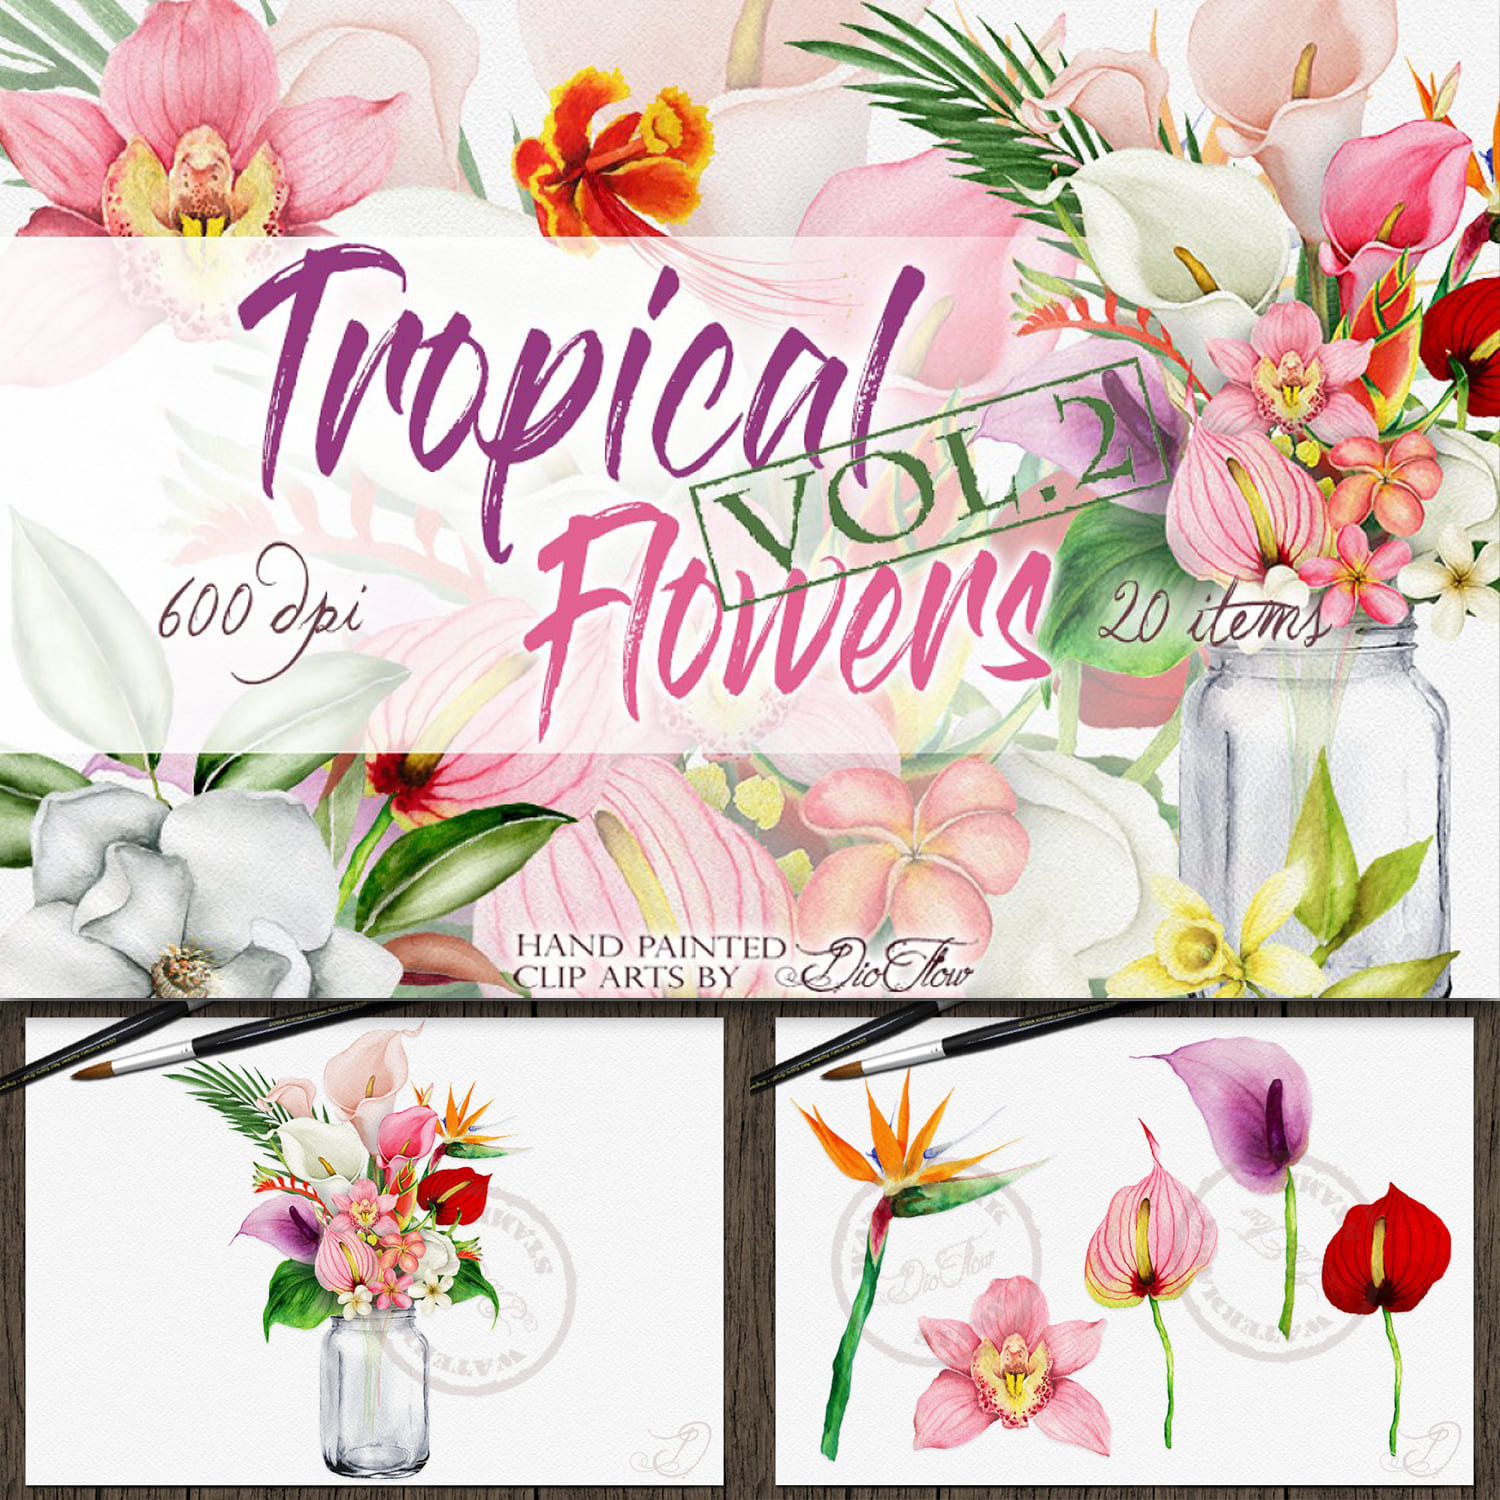 Tropical Flowers Vol. 2 Illustration cover.